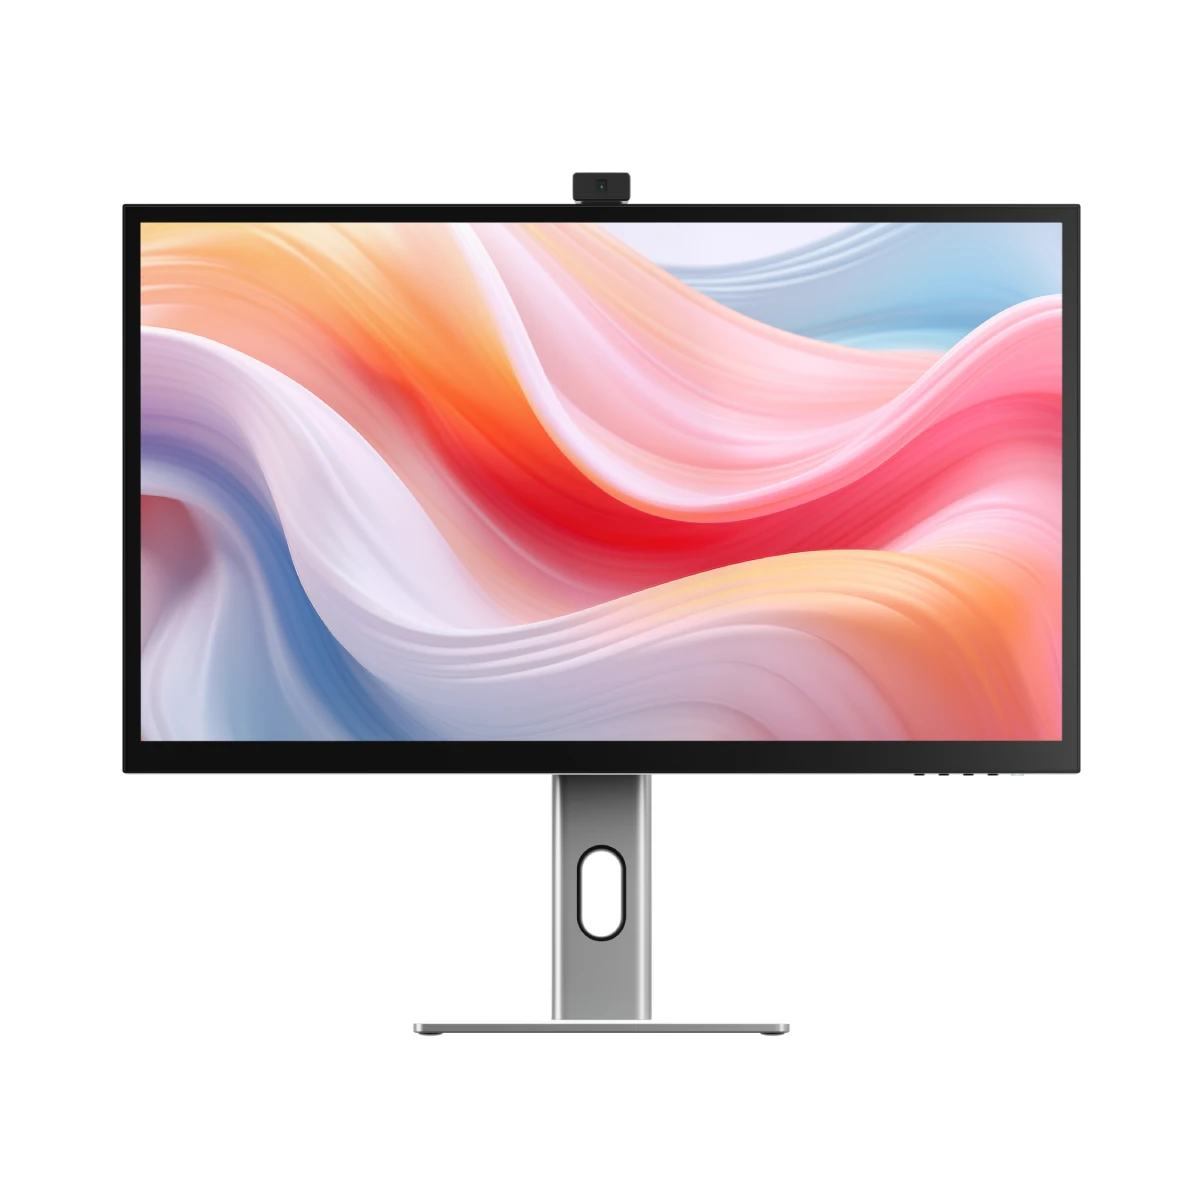 clarity-pro-27-uhd-4k-monitor-with-65w-pd-and-webcam-dual-4k-universal-docking-station-hdmi-edition2